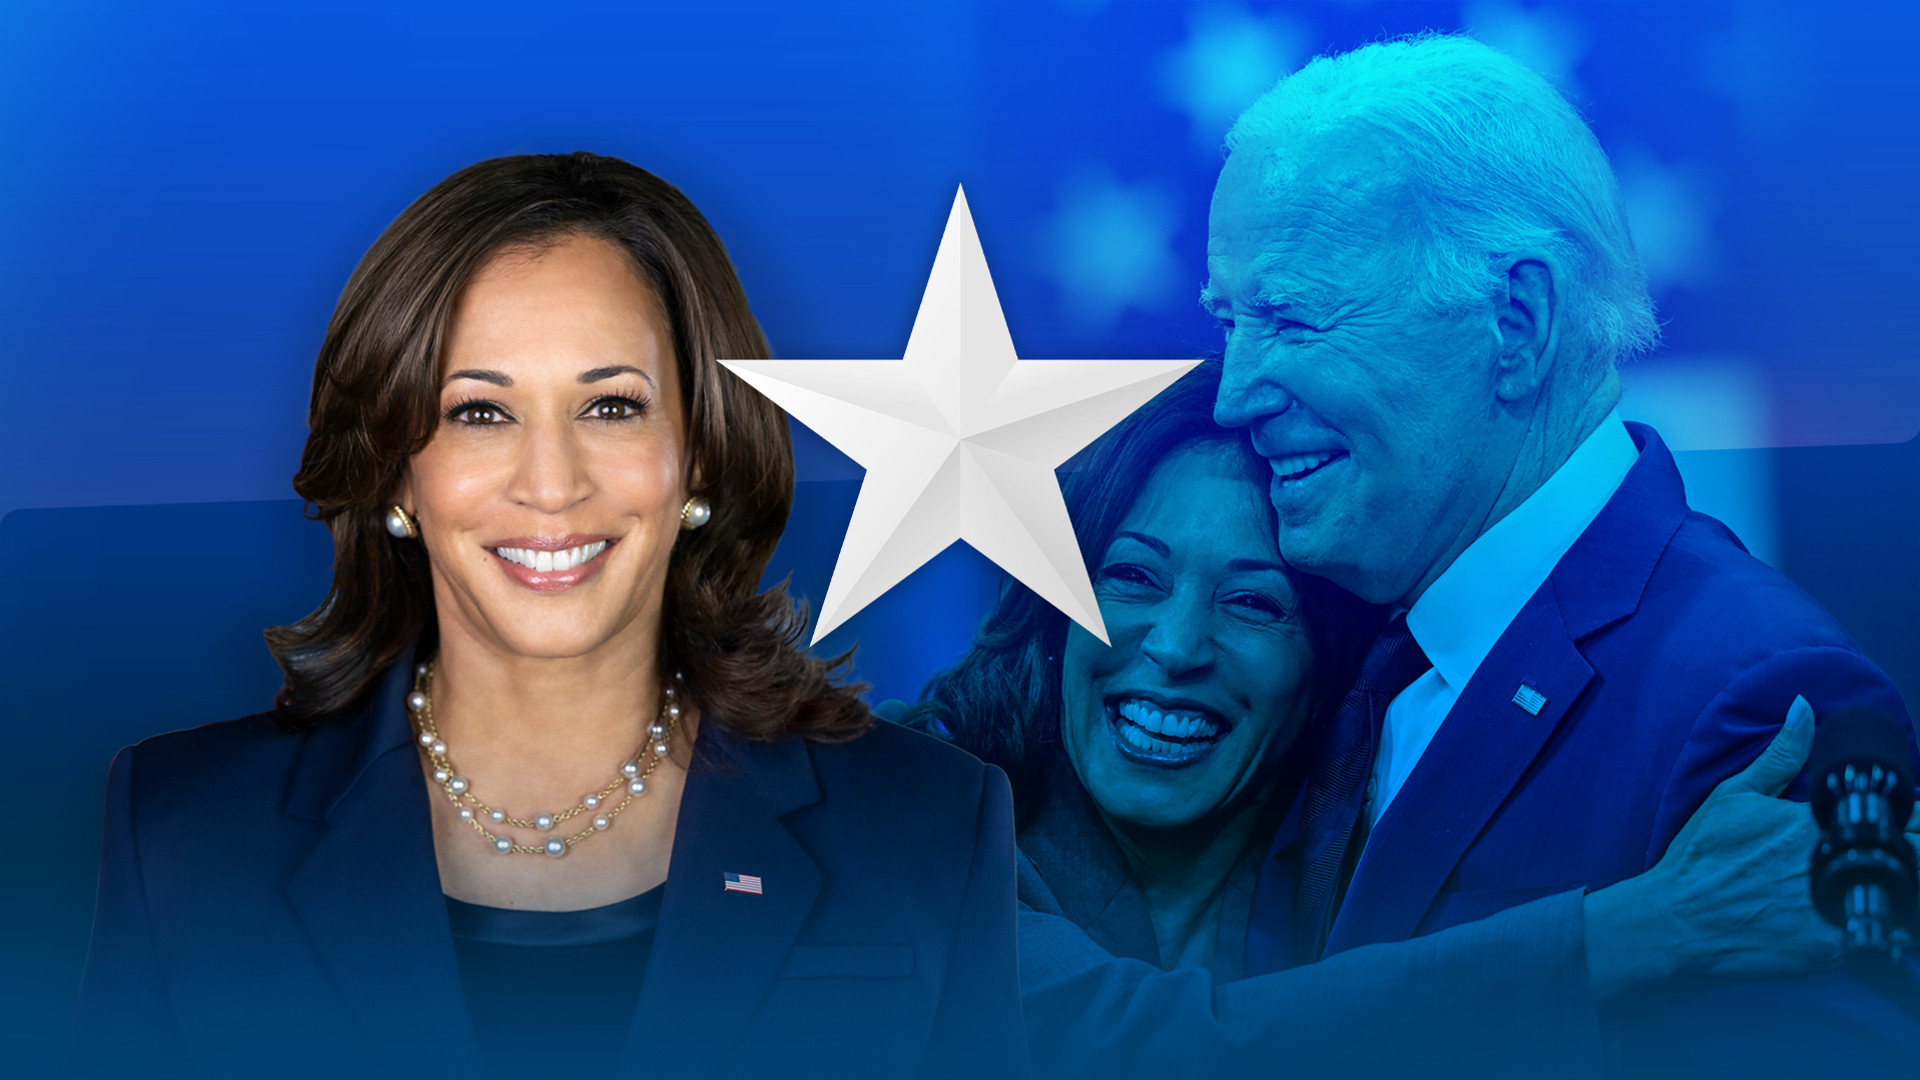 Unlike Veep, Harris’s campaign for the White House is like no other | Adam Boulton